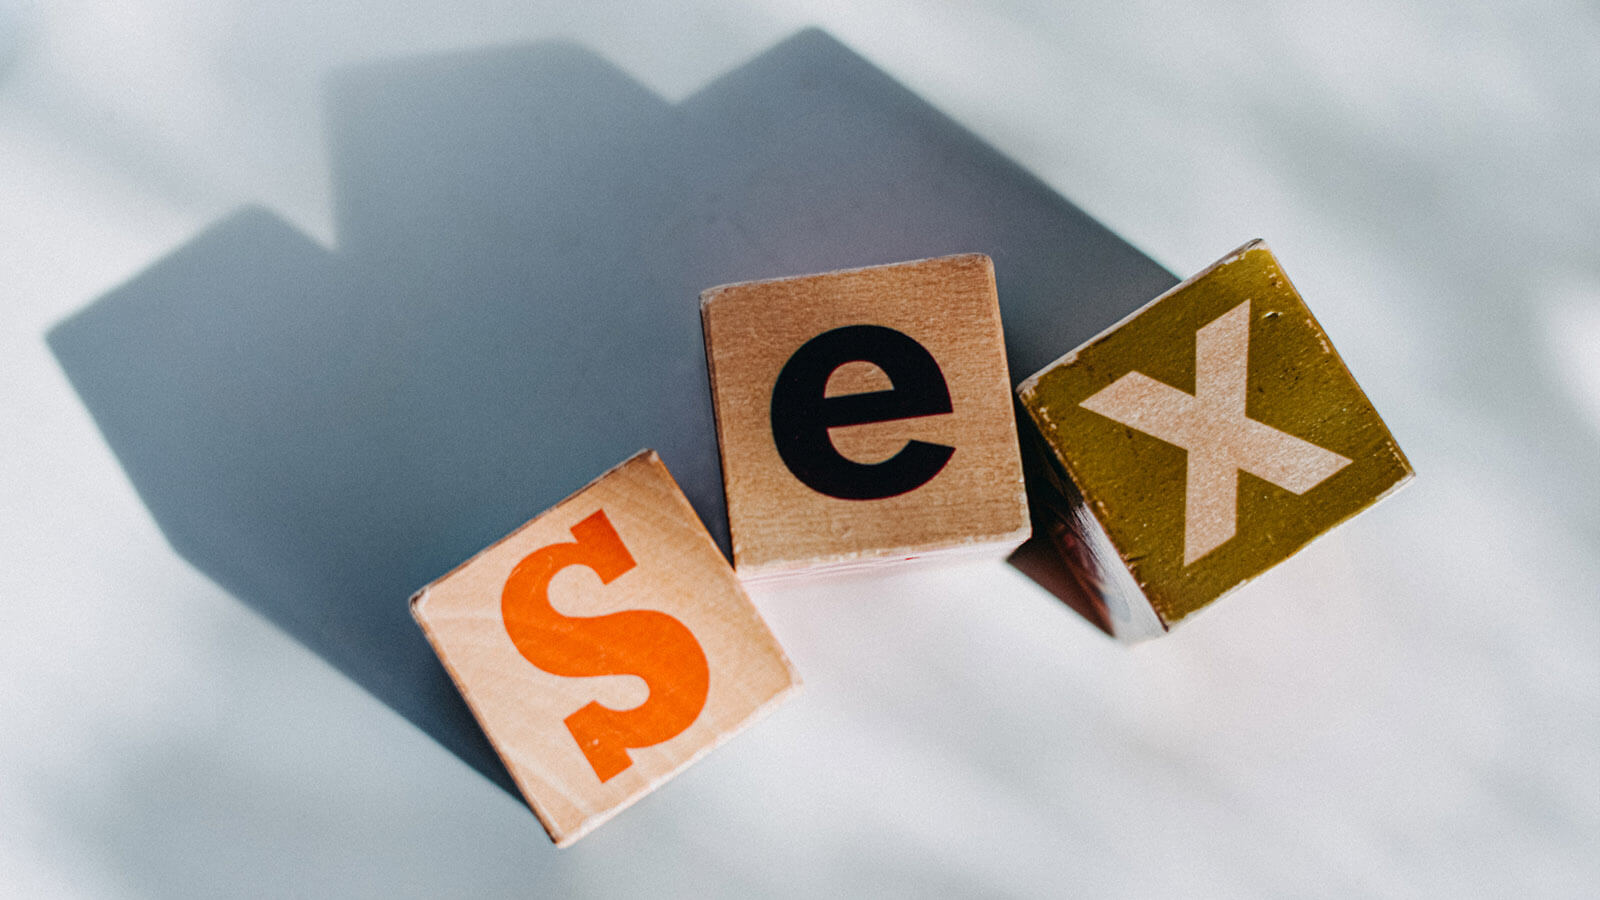 The word 'sex' spelt out in wooden blocks